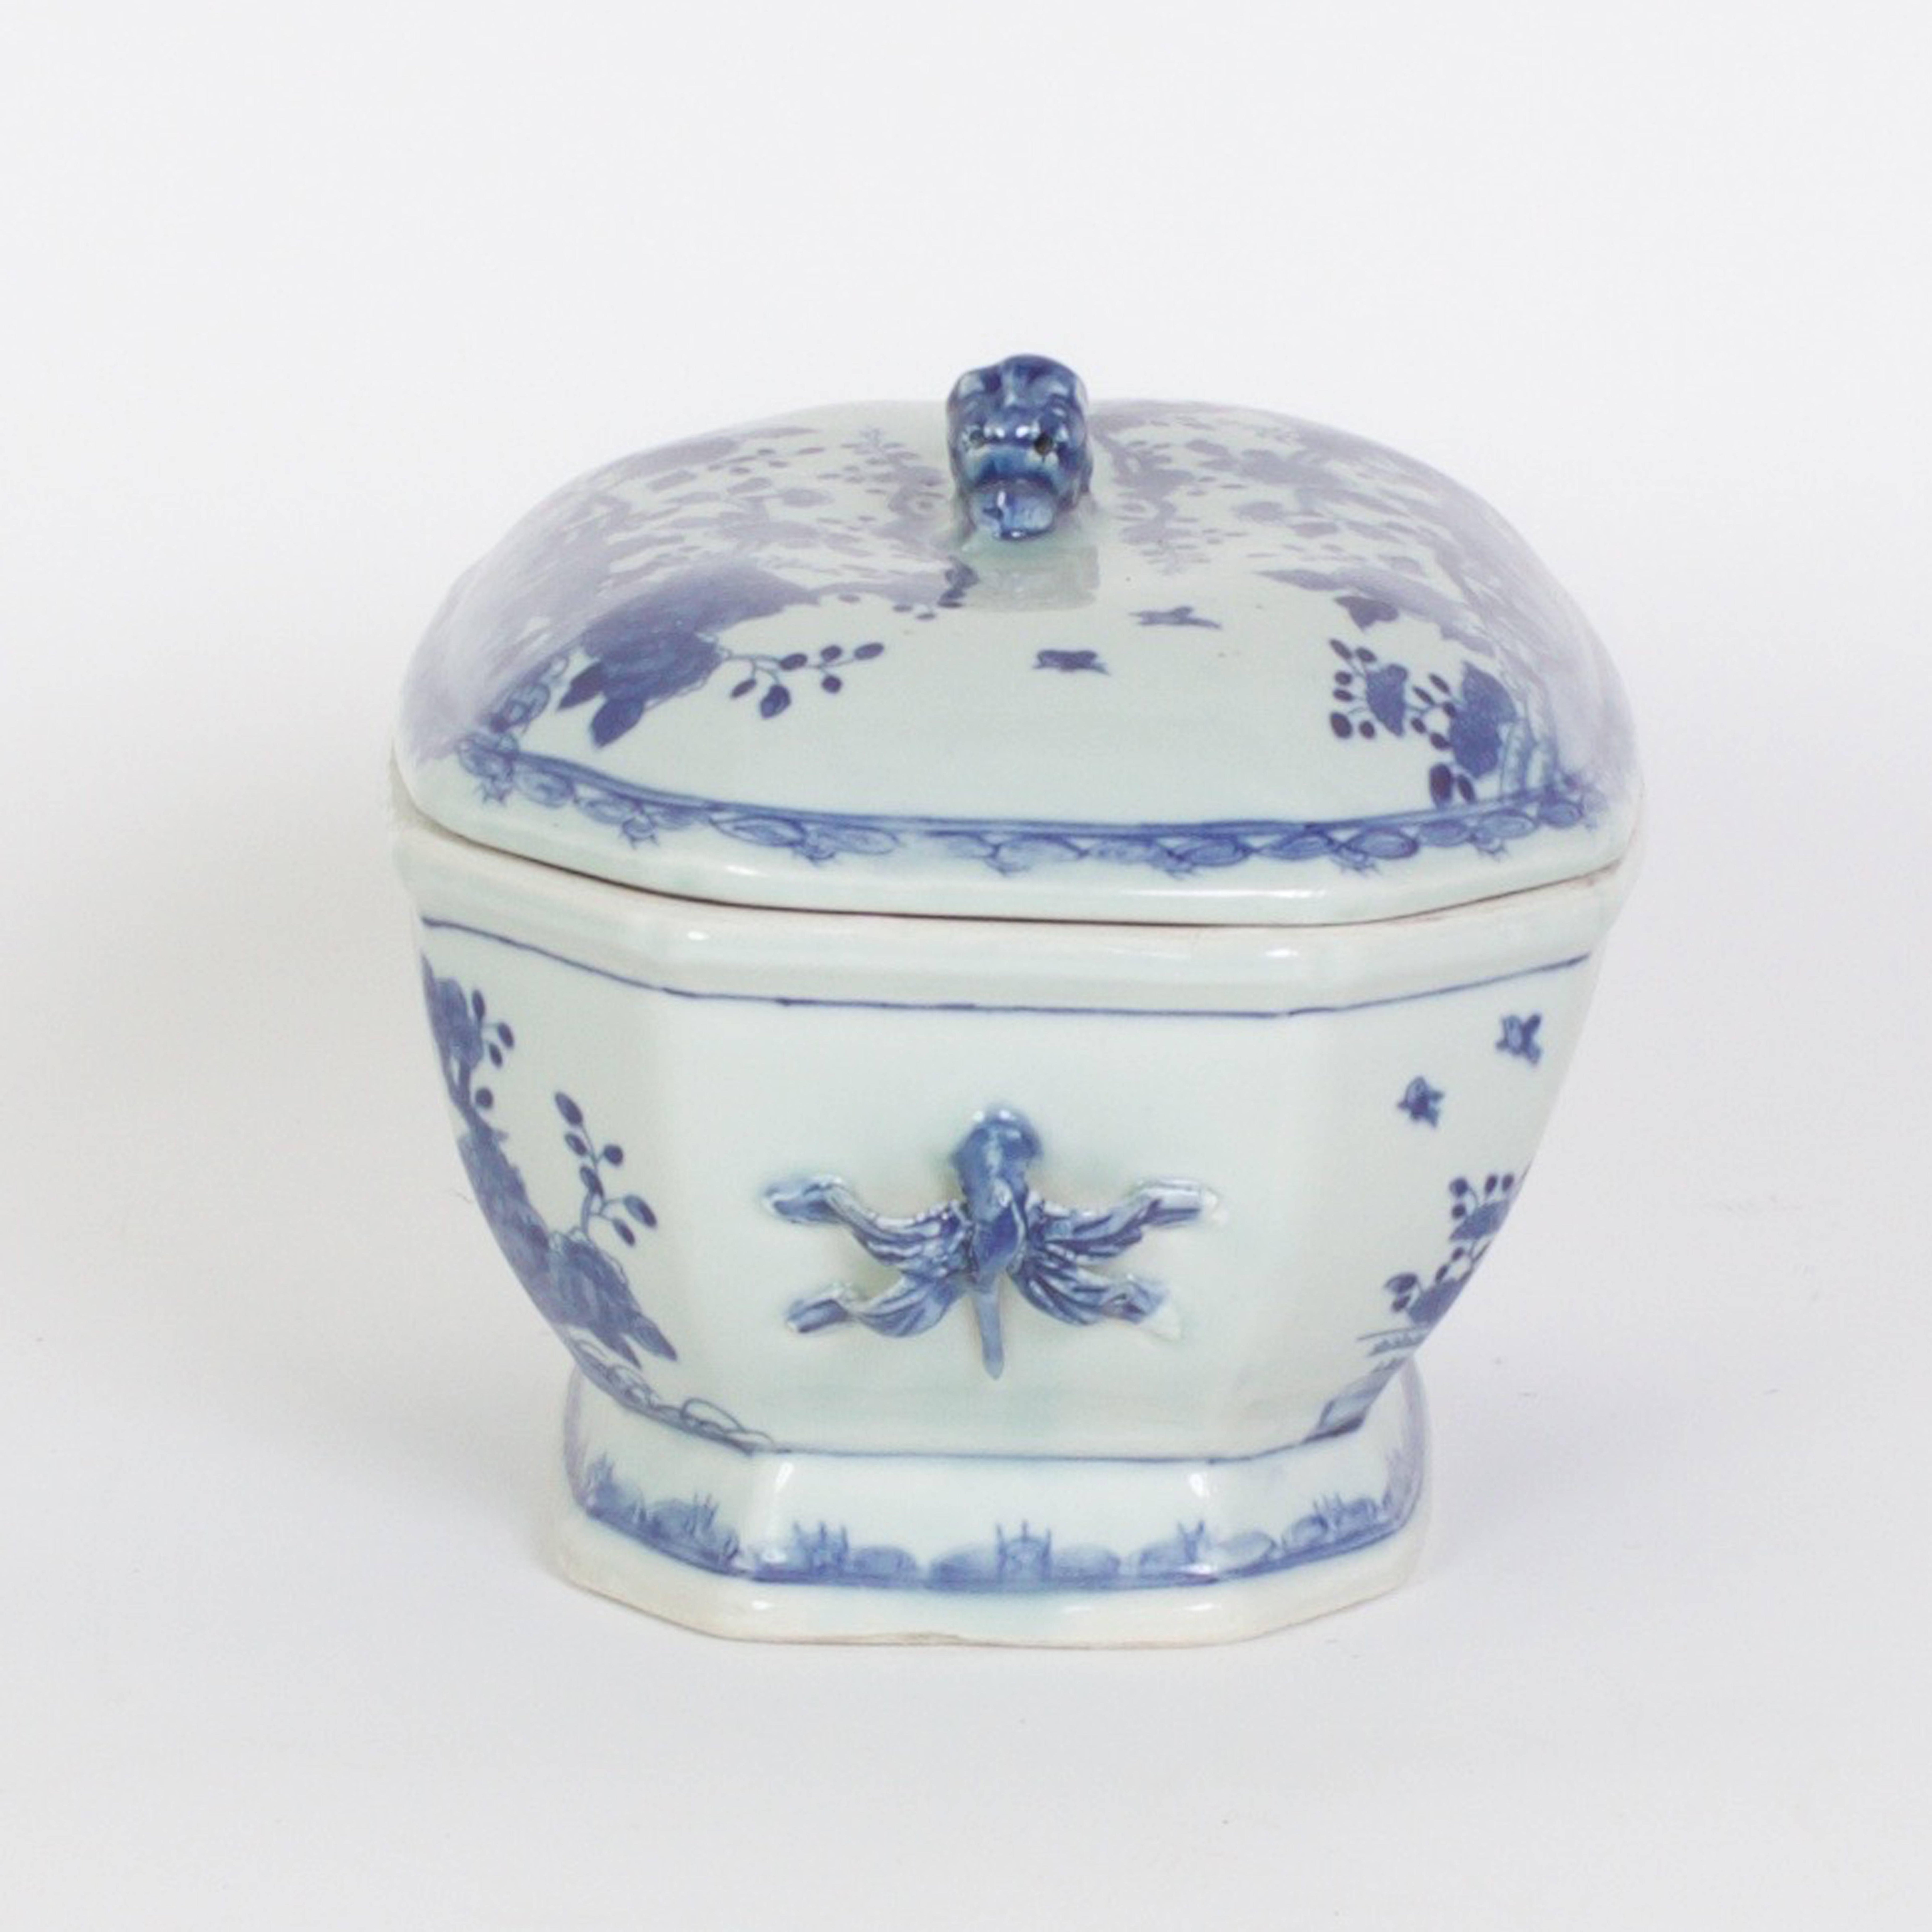 20th Century Chinese Export Style Blue and White Porcelain Lidded Tureens